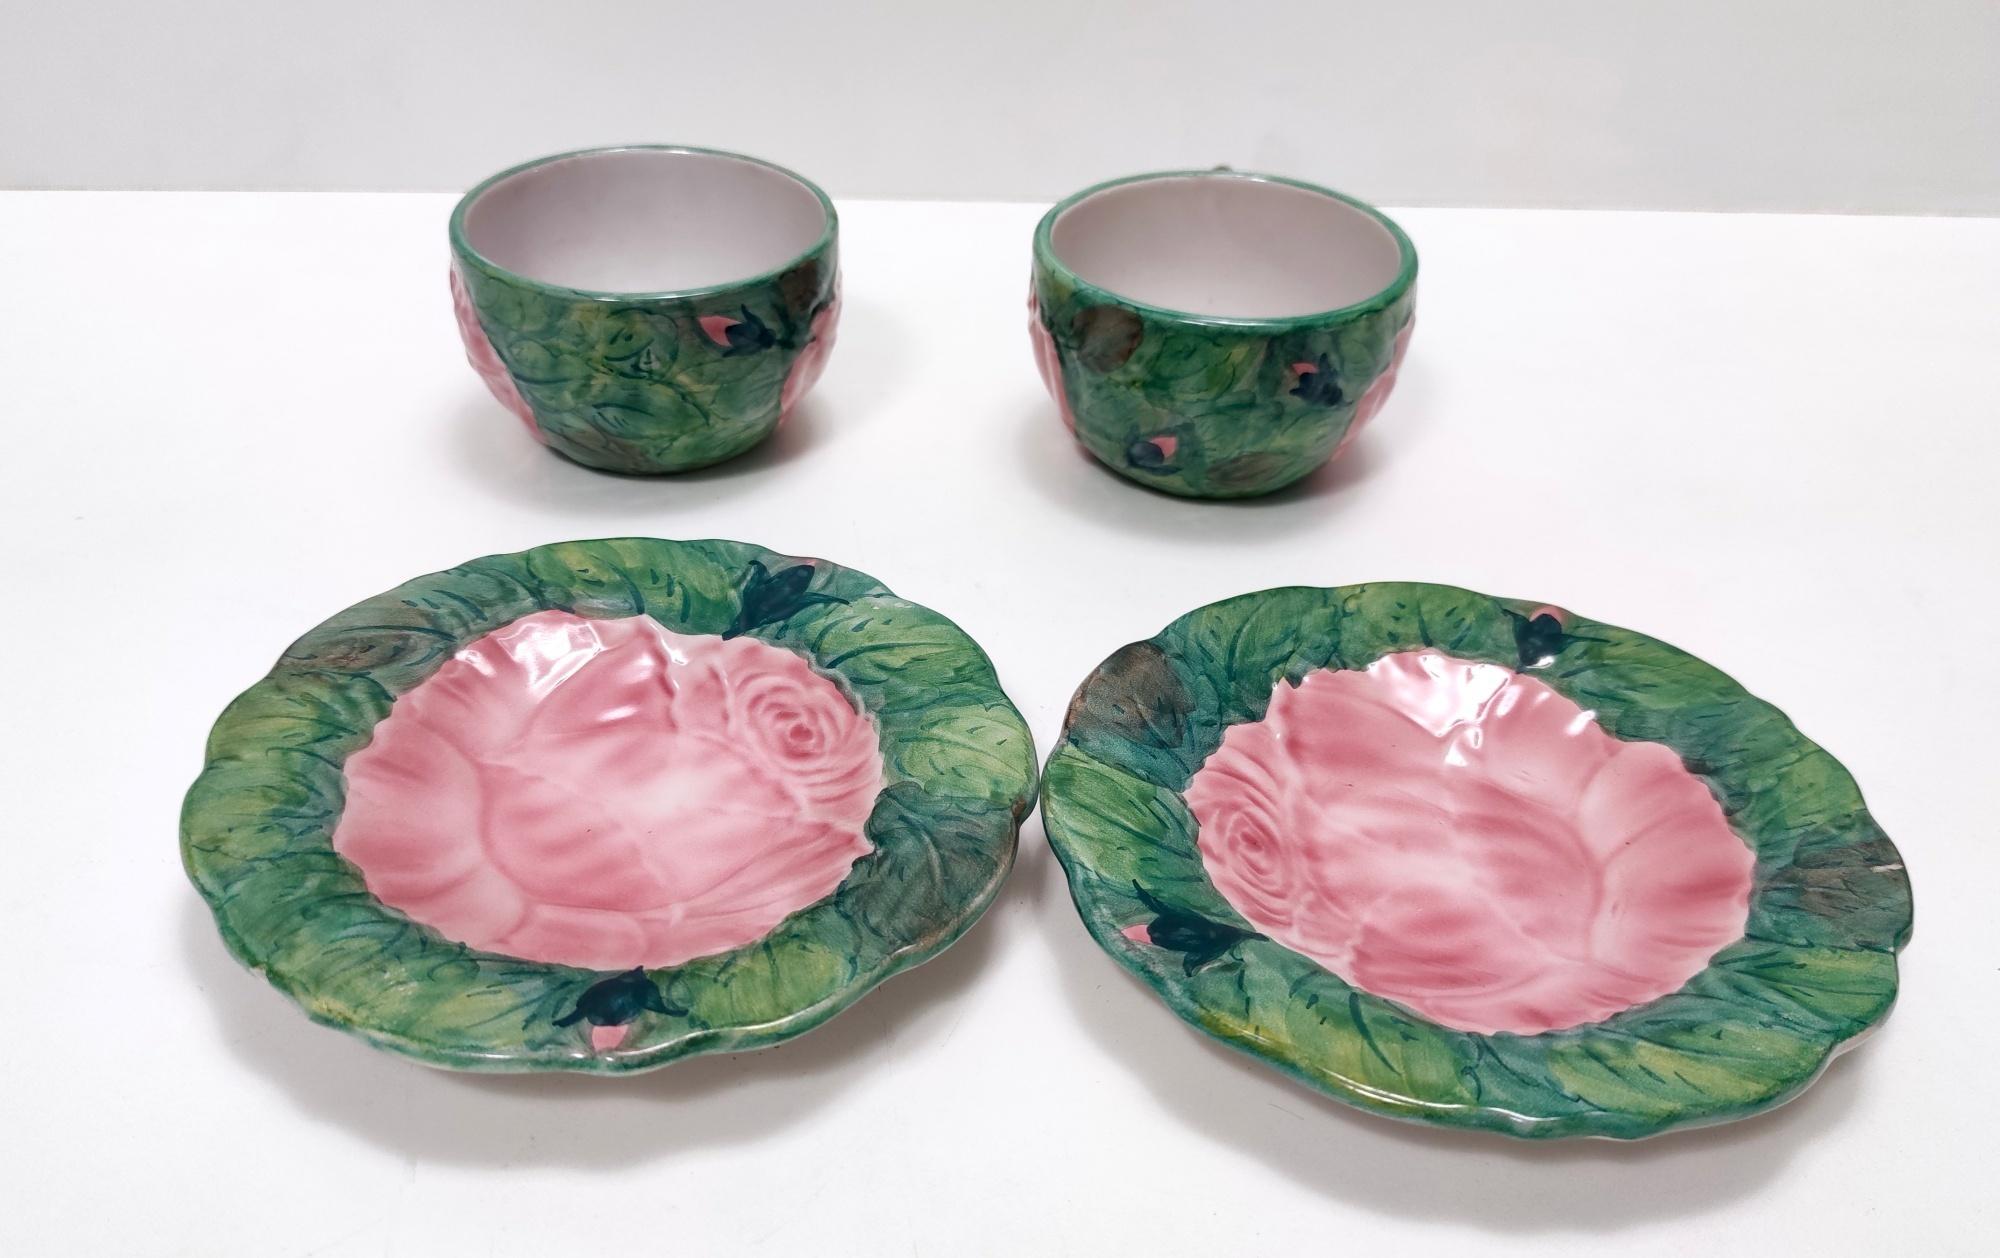 Pair of Vintage Earthenware Tea /Coffee Cups with Floral Motifs by Zaccagnini For Sale 7